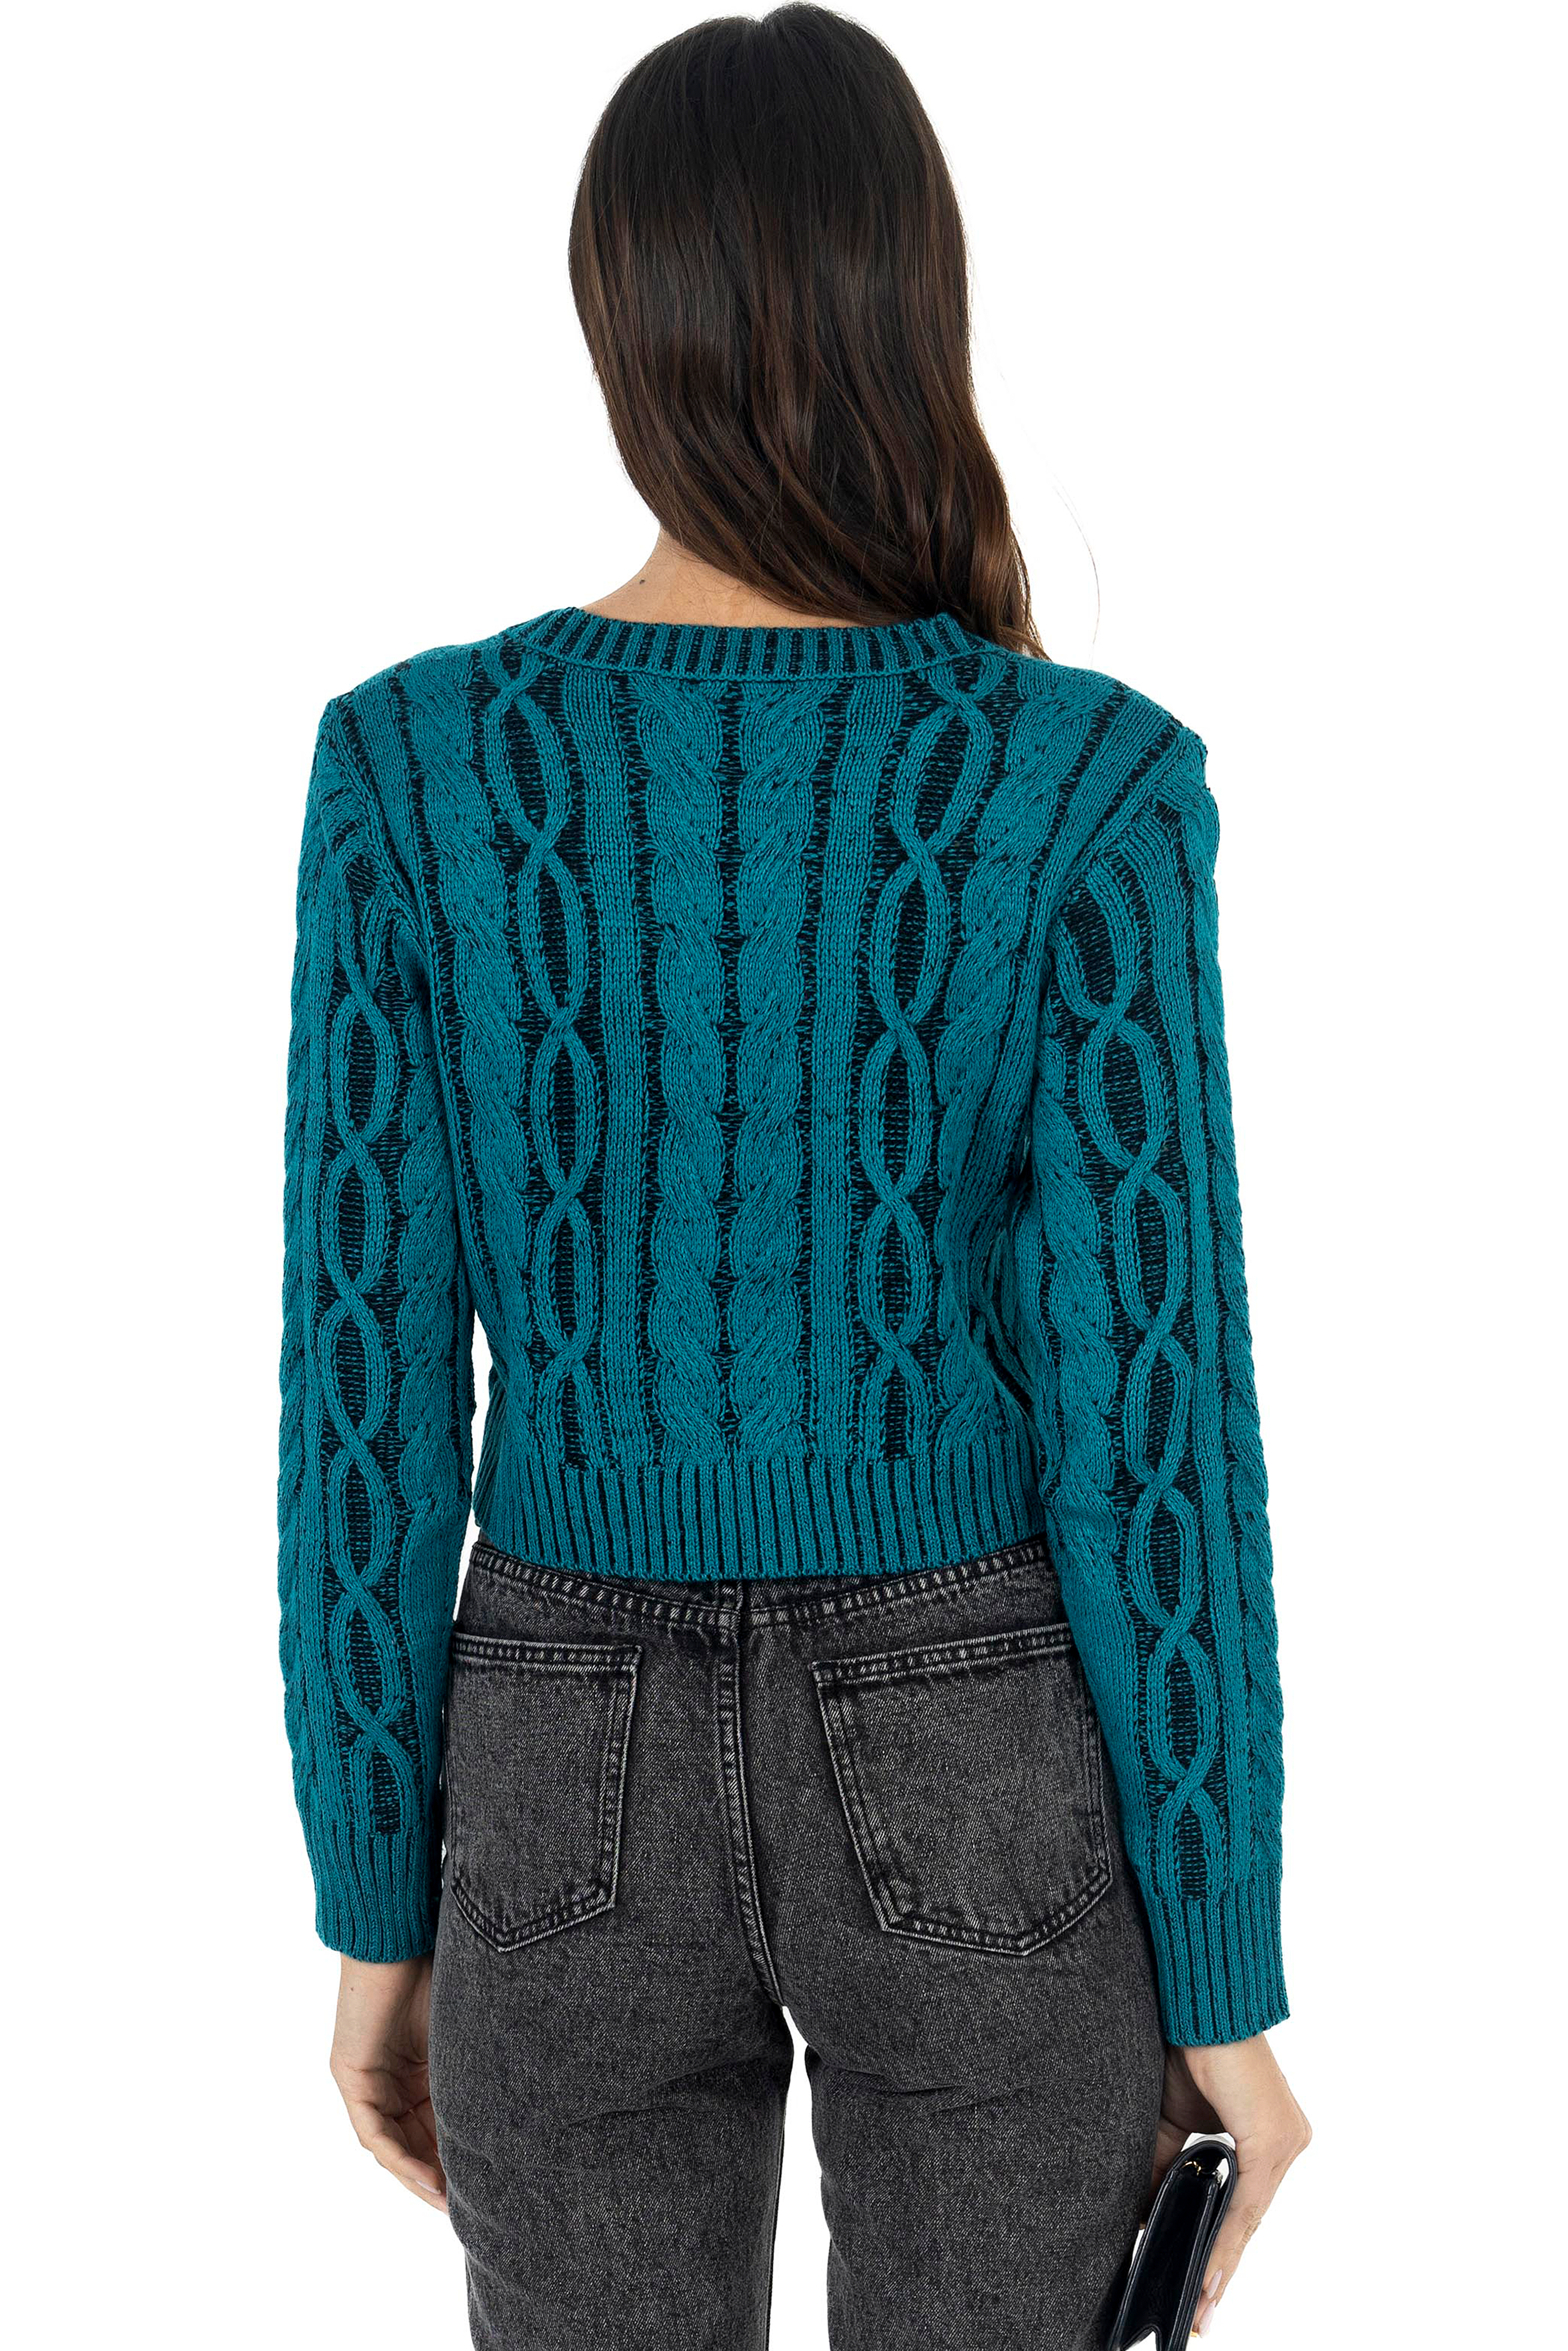 TEAL COZY SWEATER